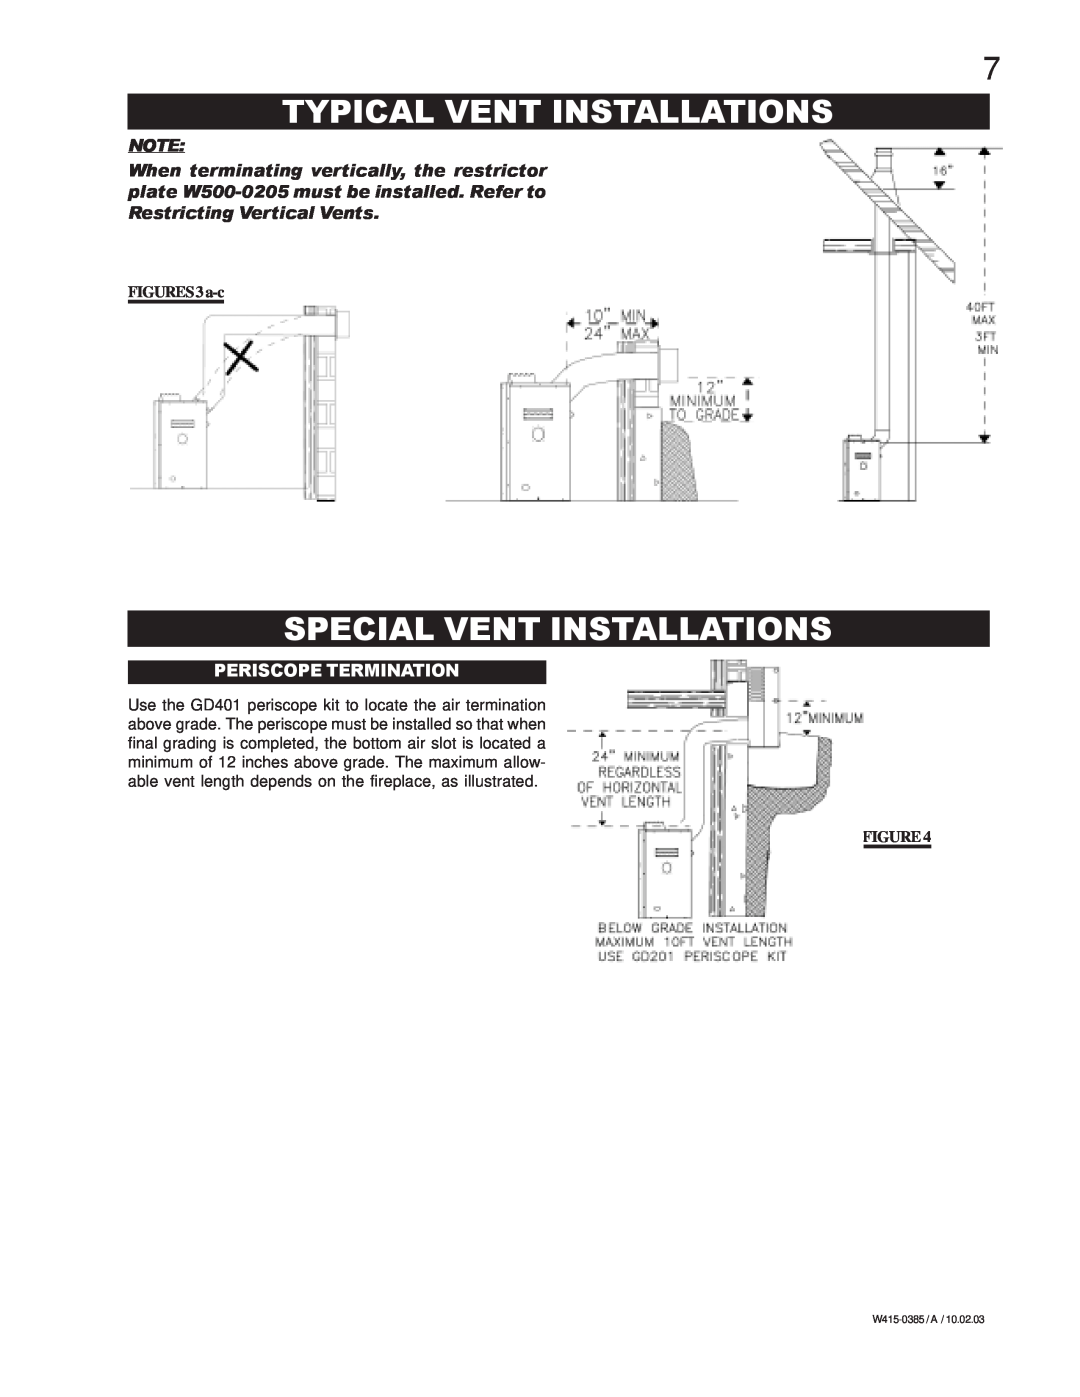 Continental BCDV42N, BCDV42P Typical Vent Installations, Special Vent Installations, Periscope Termination, FIGURES 3 a-c 